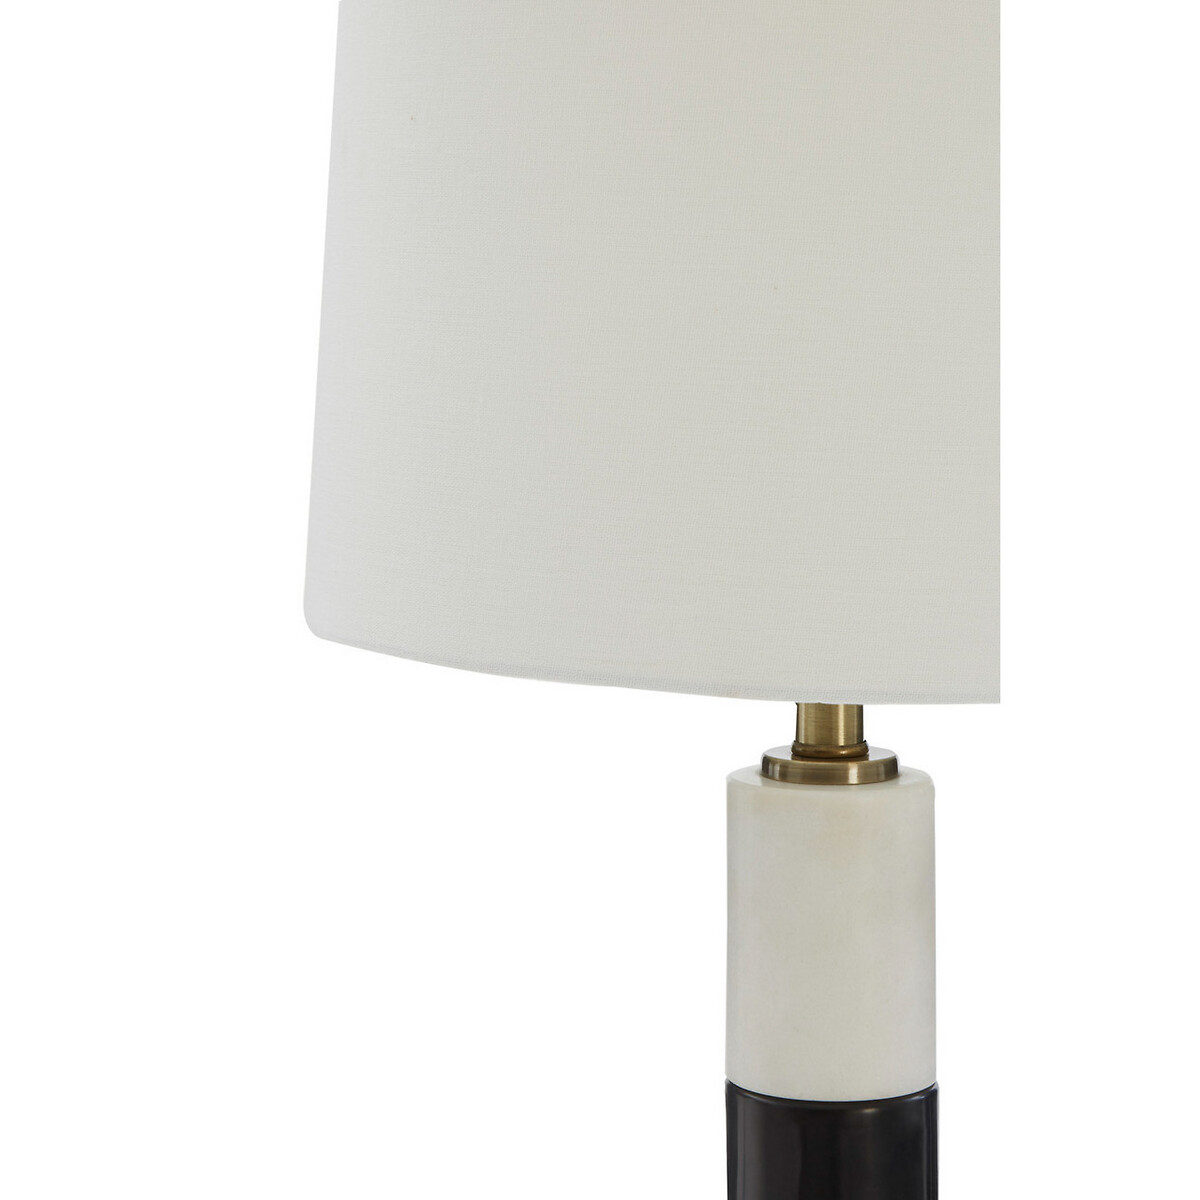 White Marble Stripe Table Lamp, Black And White Striped Table Lamp Shade